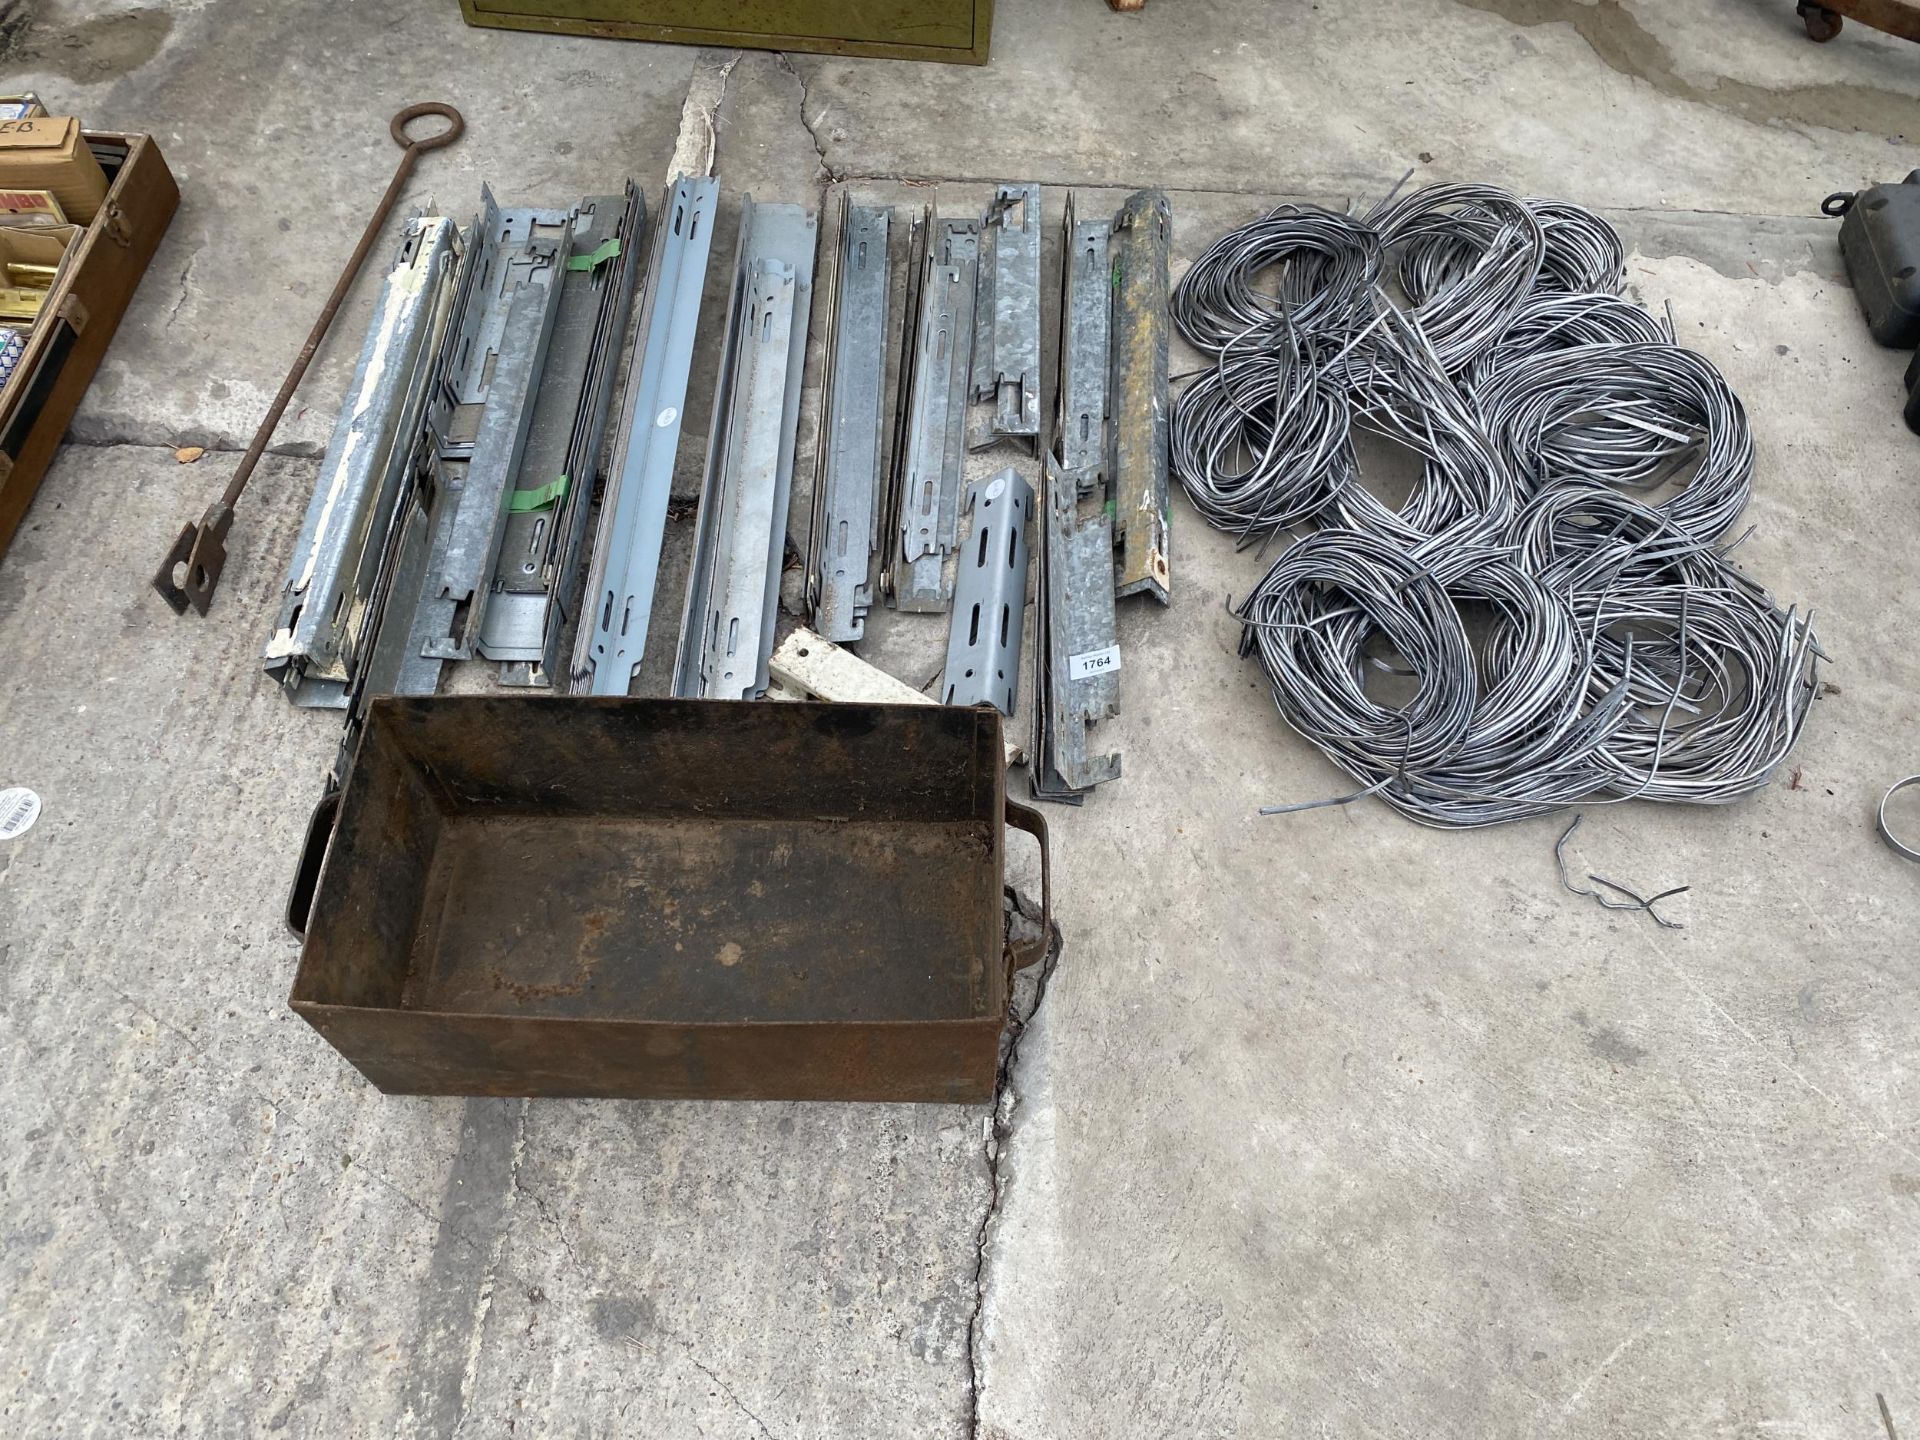 A LARGE QUANTITY OF RADIATOR BRACKETS AND WINDOW LEAD